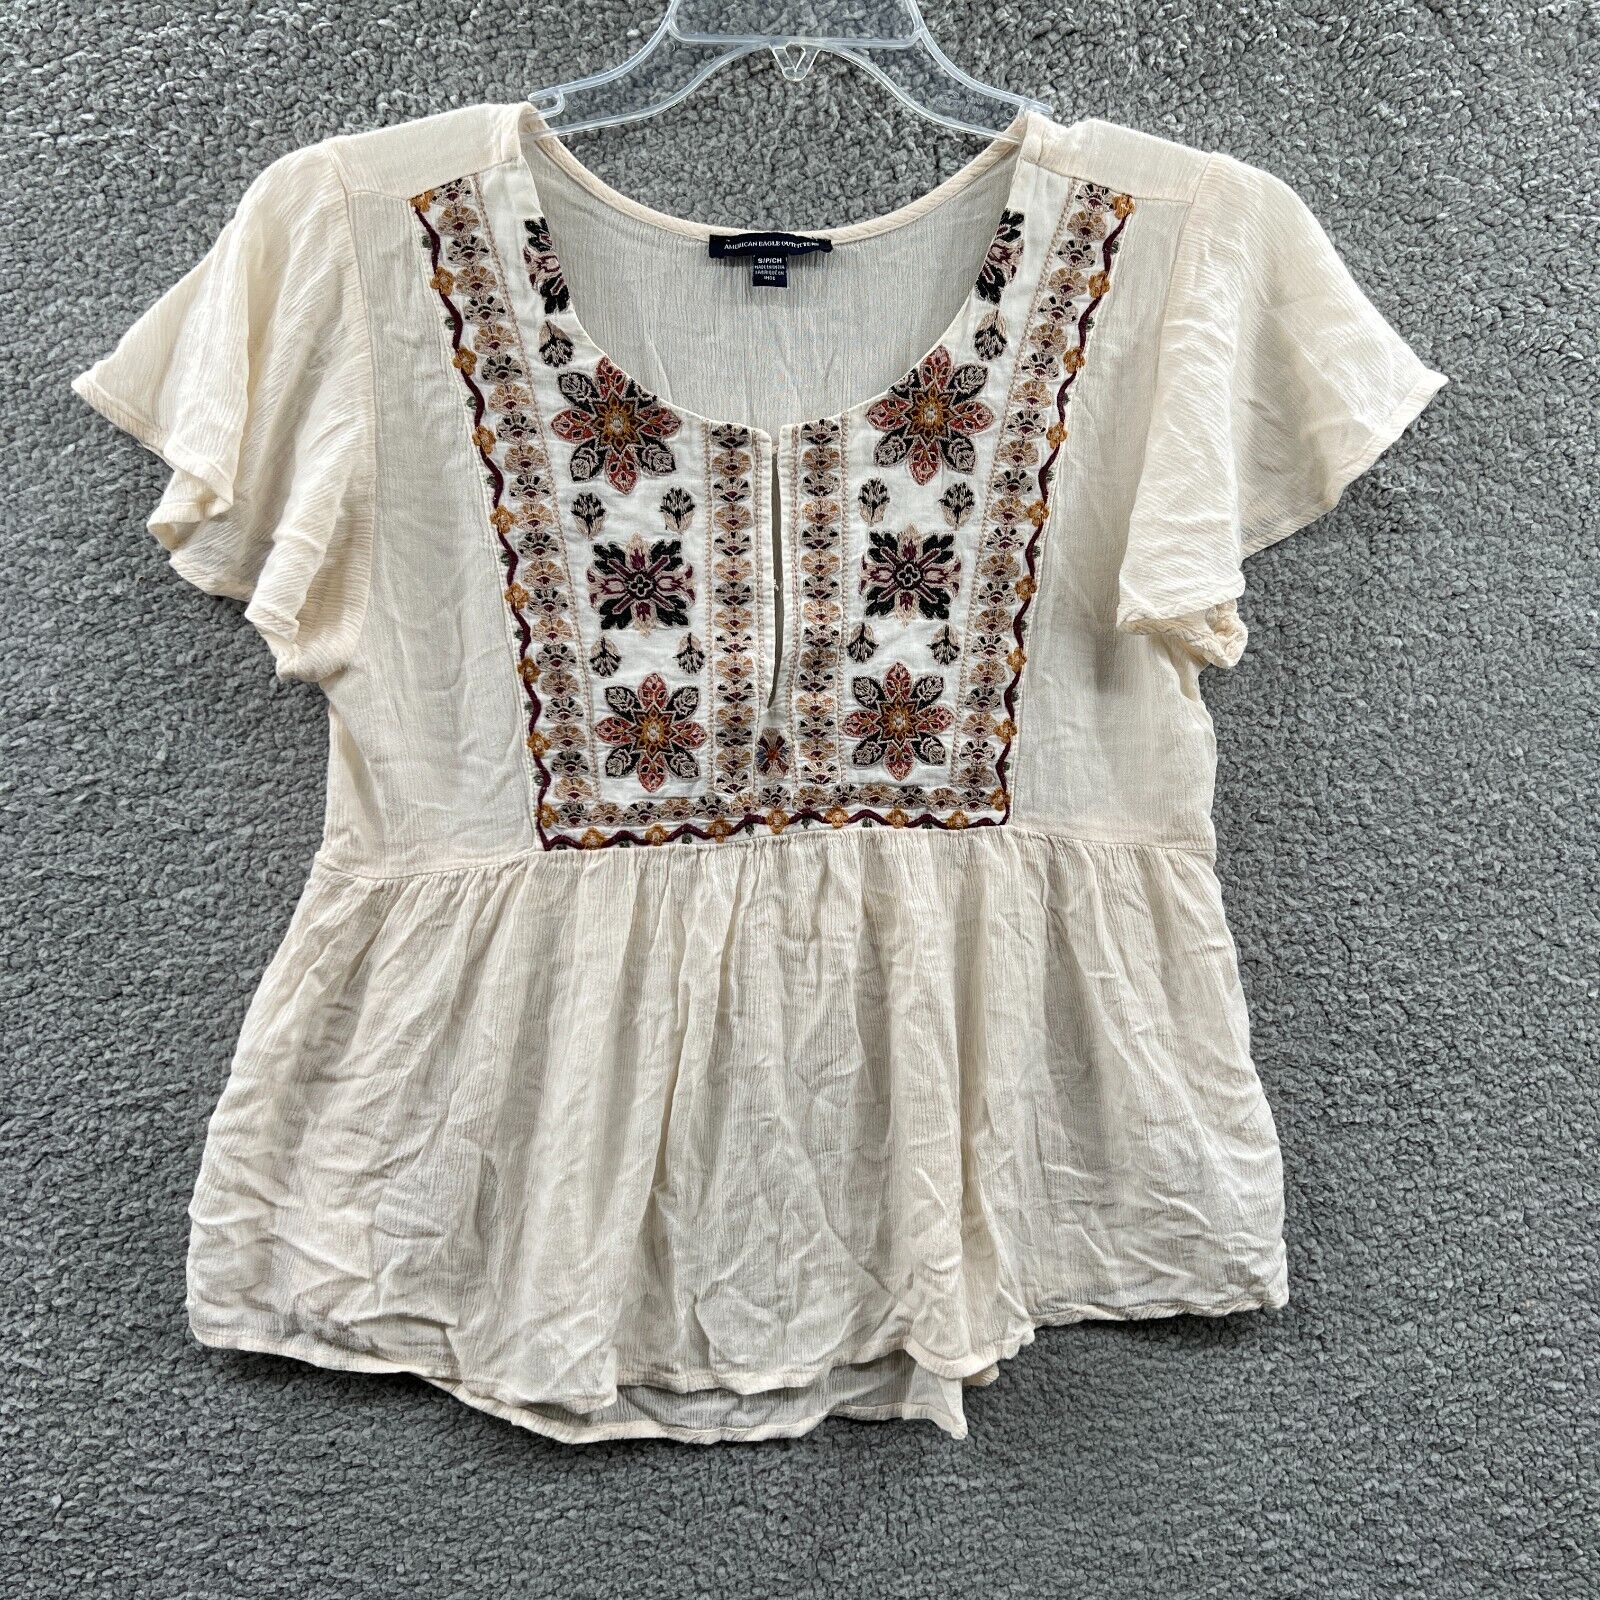 Anthropologie Pepin Women's Ivory Peasant Embroidered Floral Blouse Shirt Size S